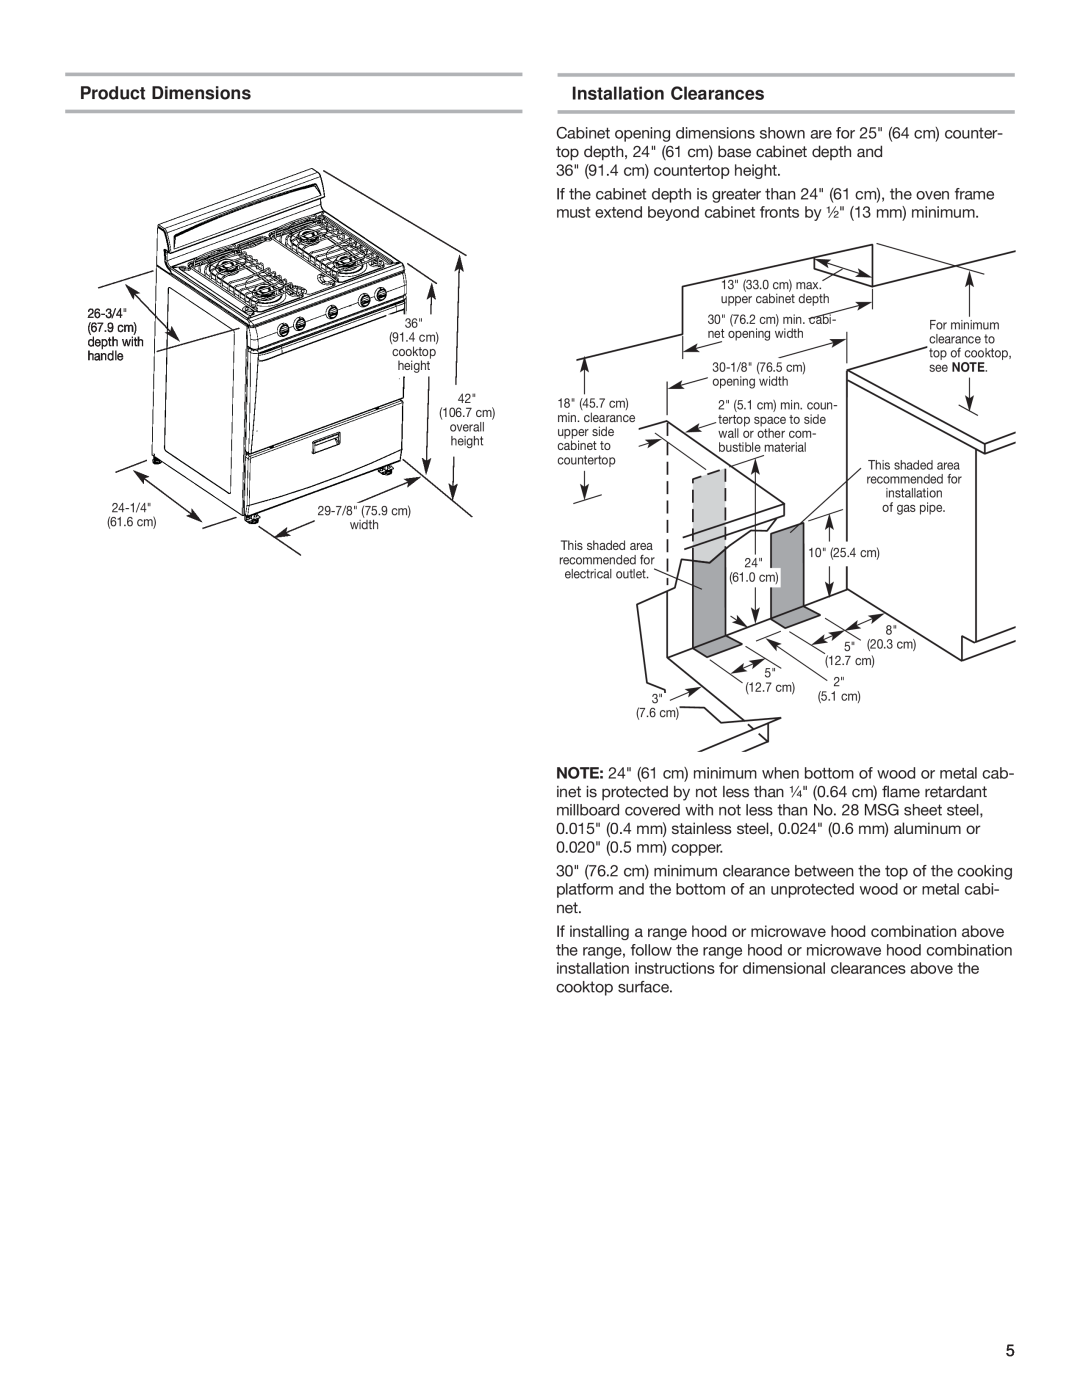 Whirlpool W10130752A installation instructions Product Dimensions, Installation Clearances 